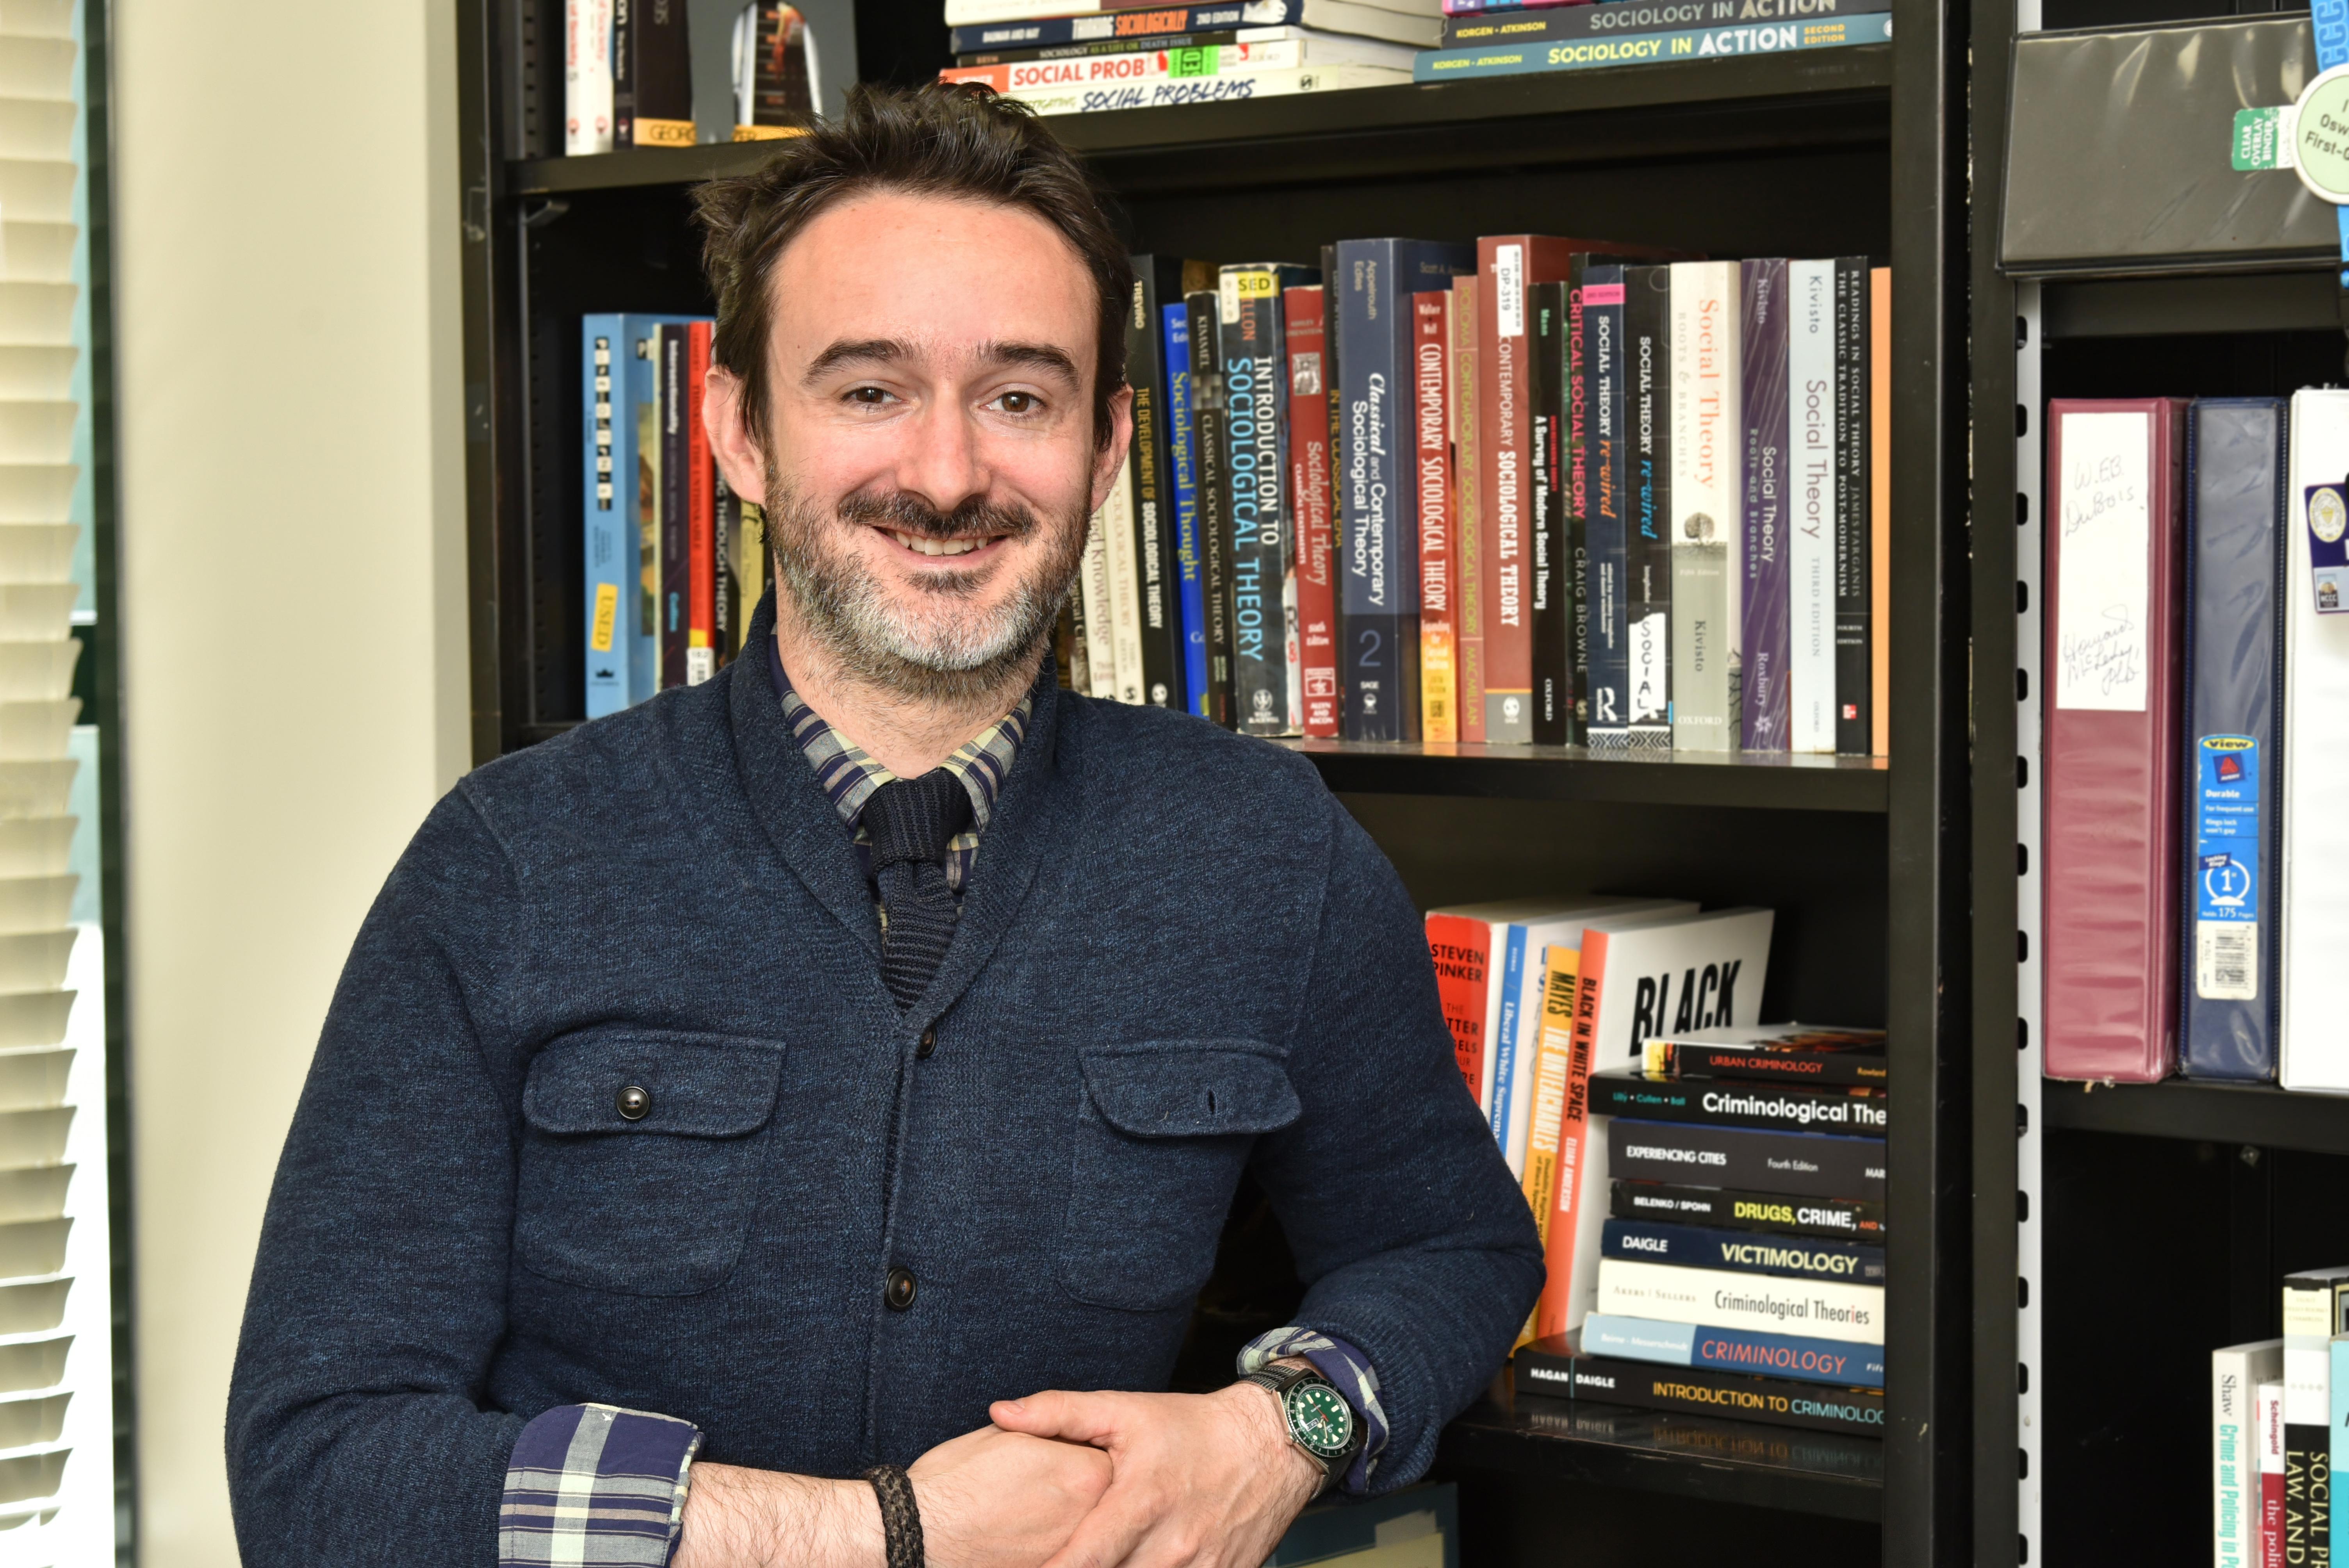 Matthew H. McLeskey, an assistant professor of criminal justice, was selected for a two-week summer project funded by National Endowment for the Humanities (NEH), focusing on the importance of regional storytelling in fostering a sense of place.